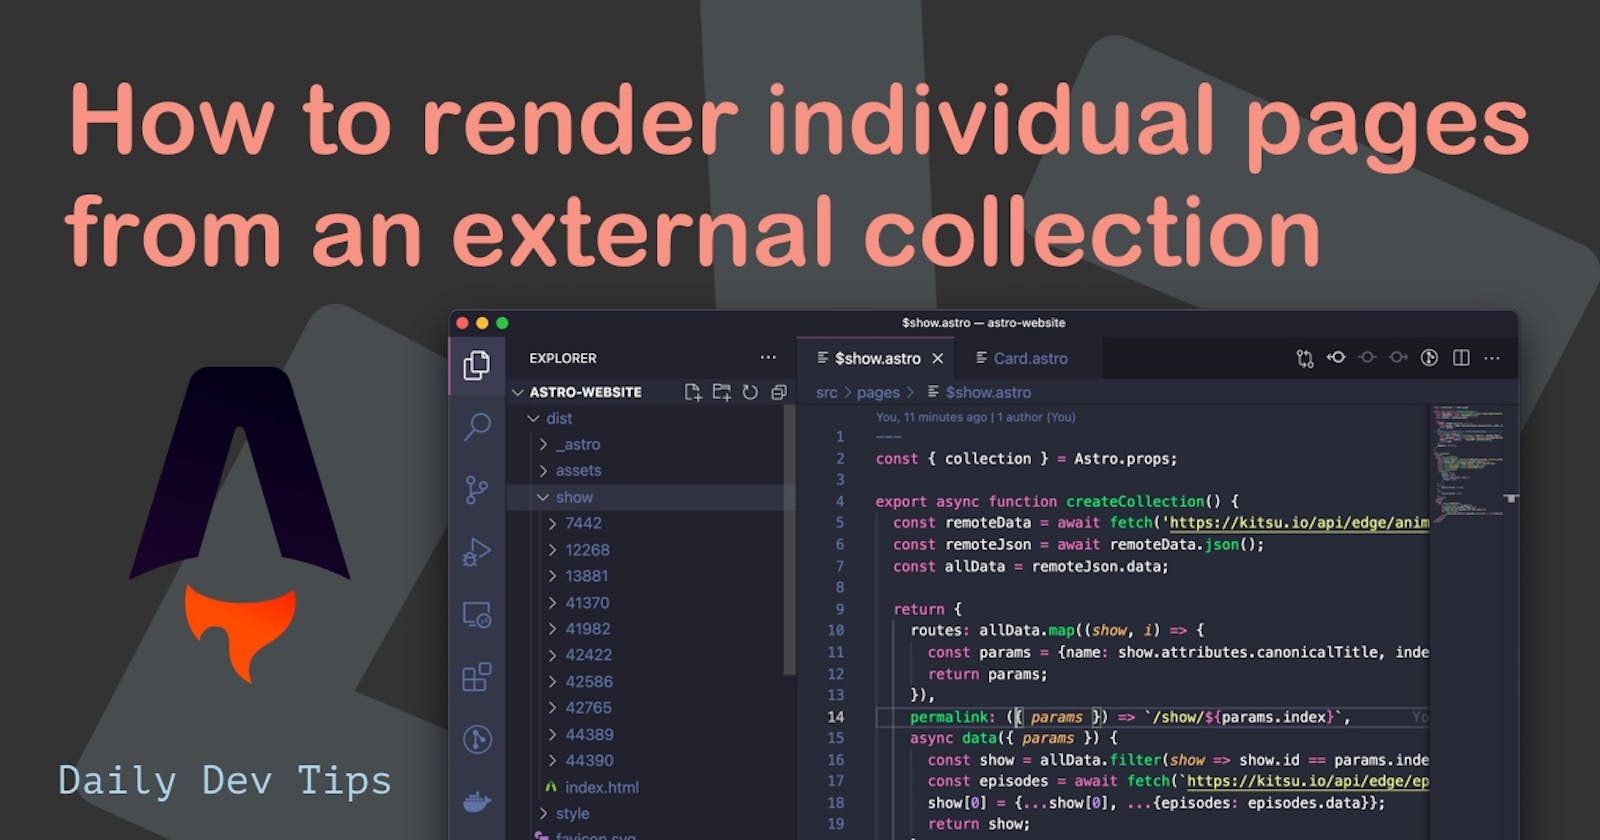 How to render individual pages from an external collection